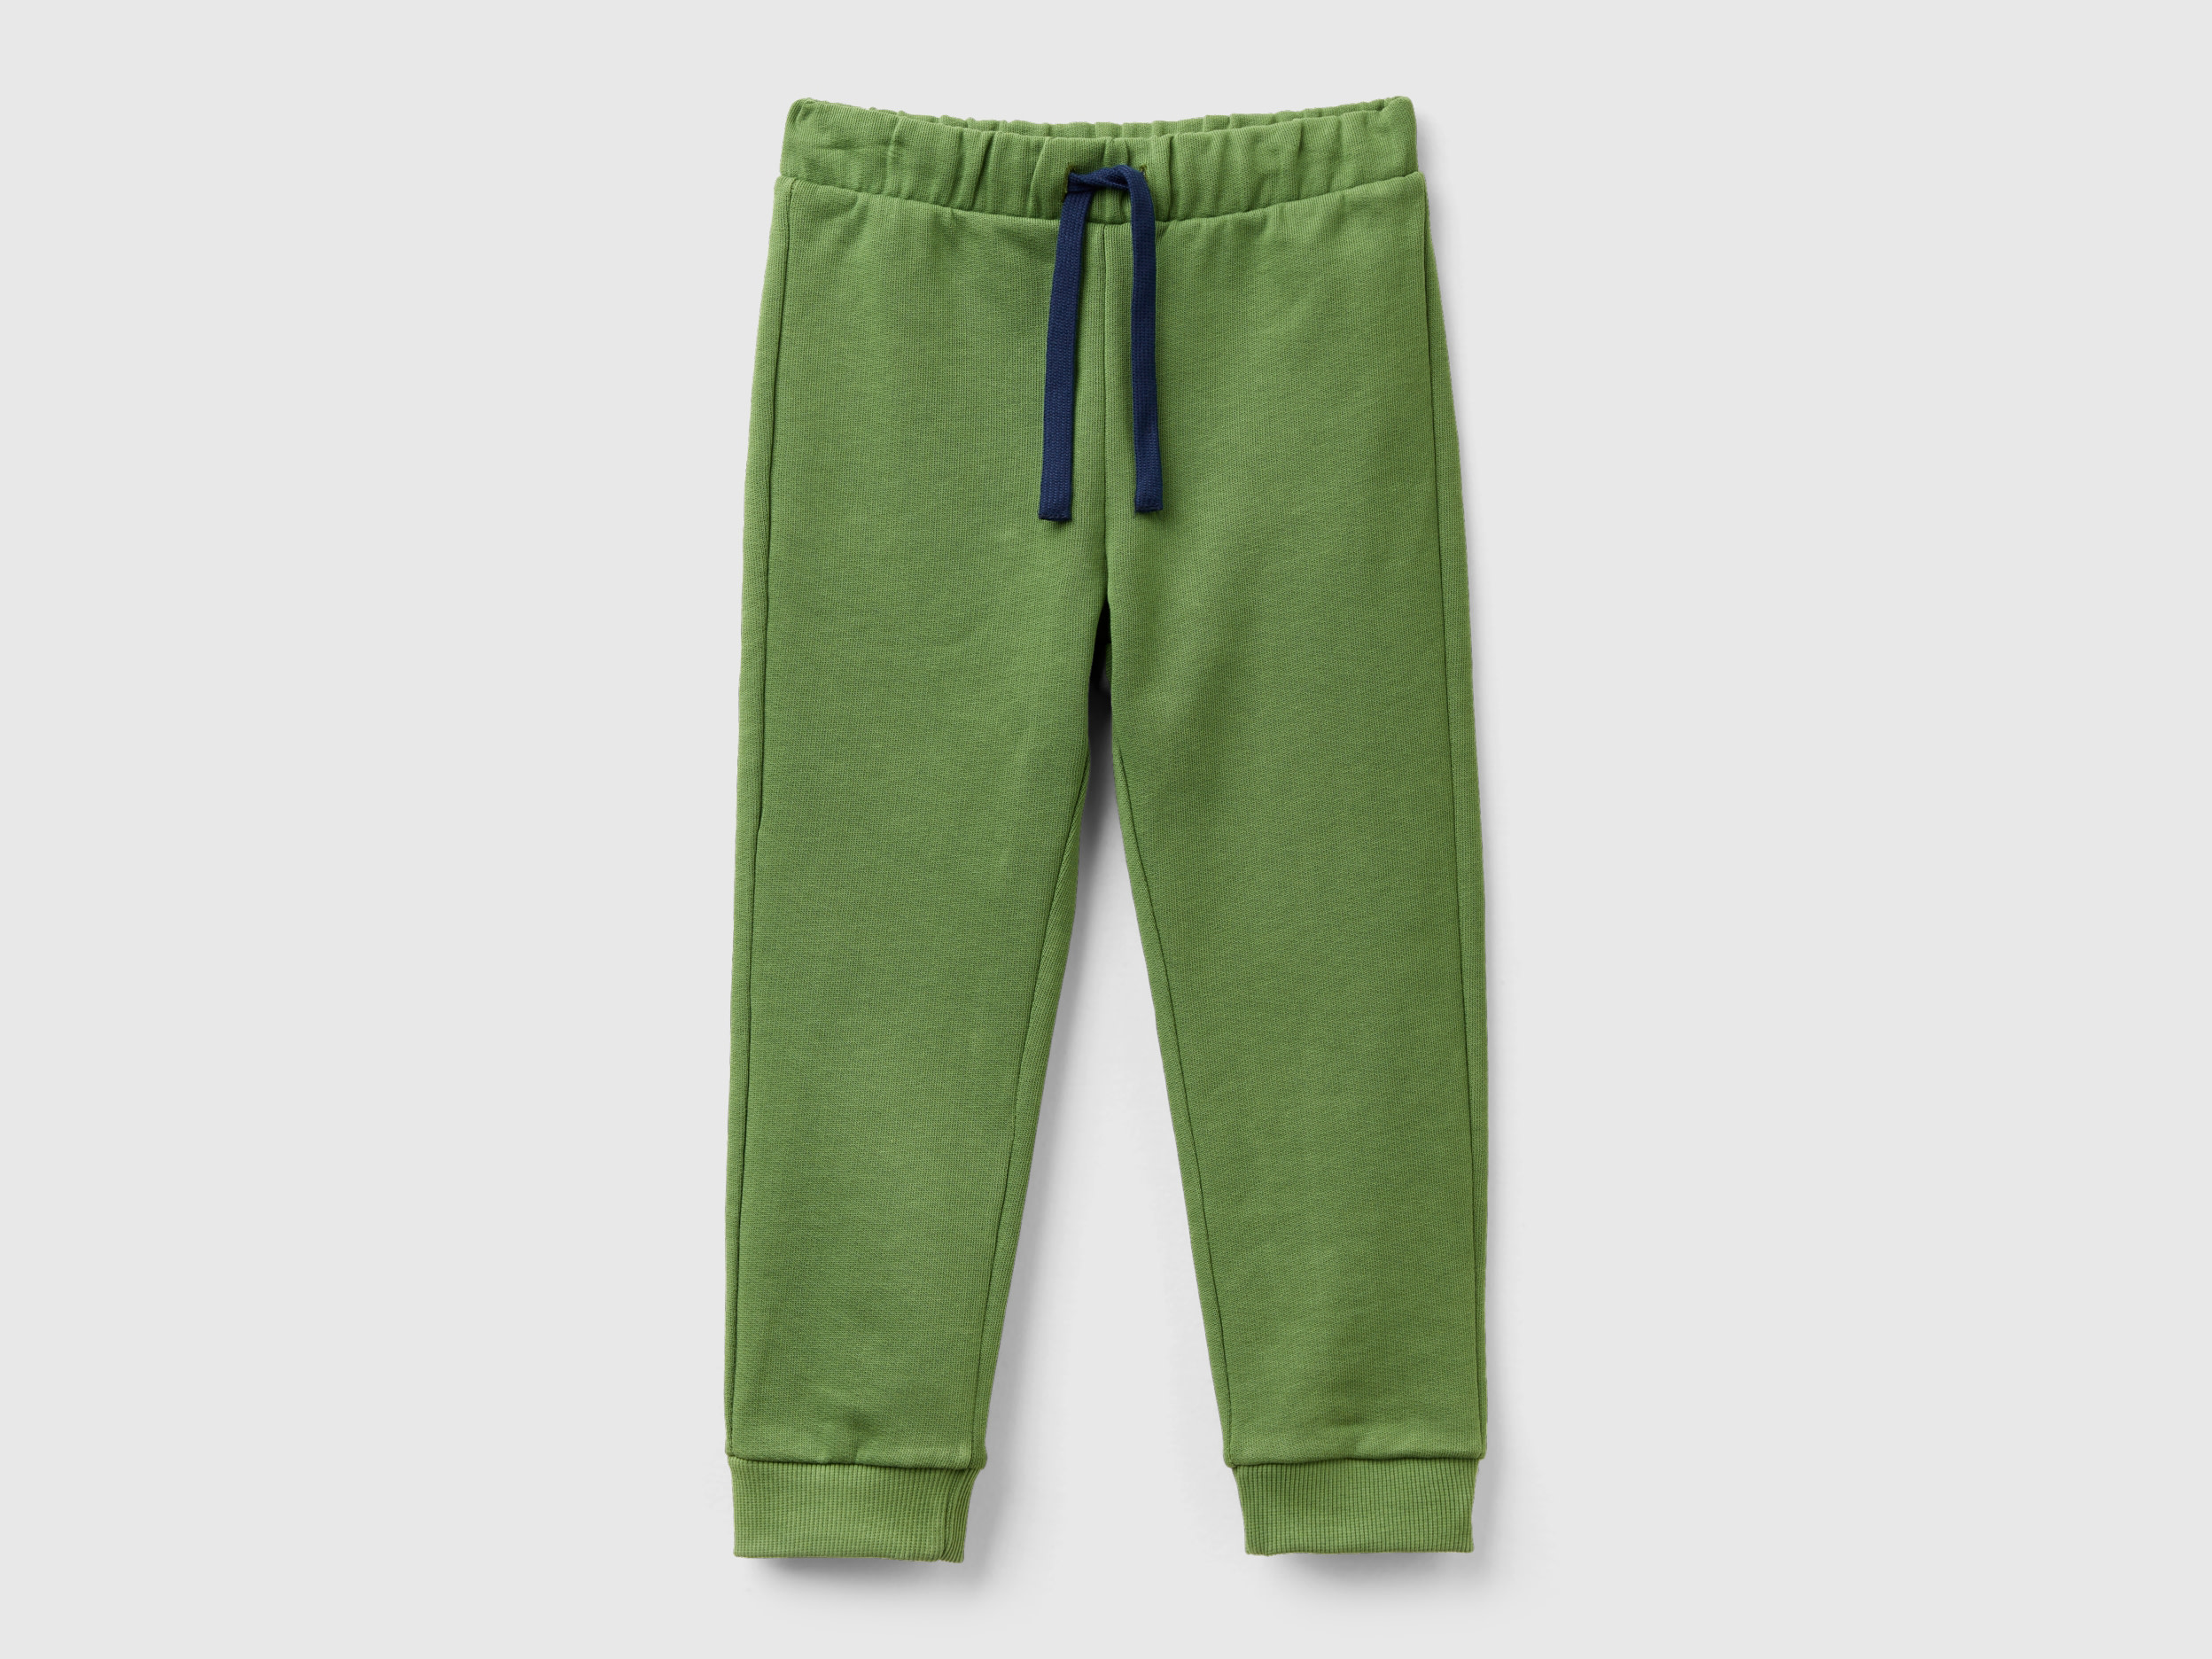 Image of Benetton, Sweatpants With Pocket, size 82, Military Green, Kids